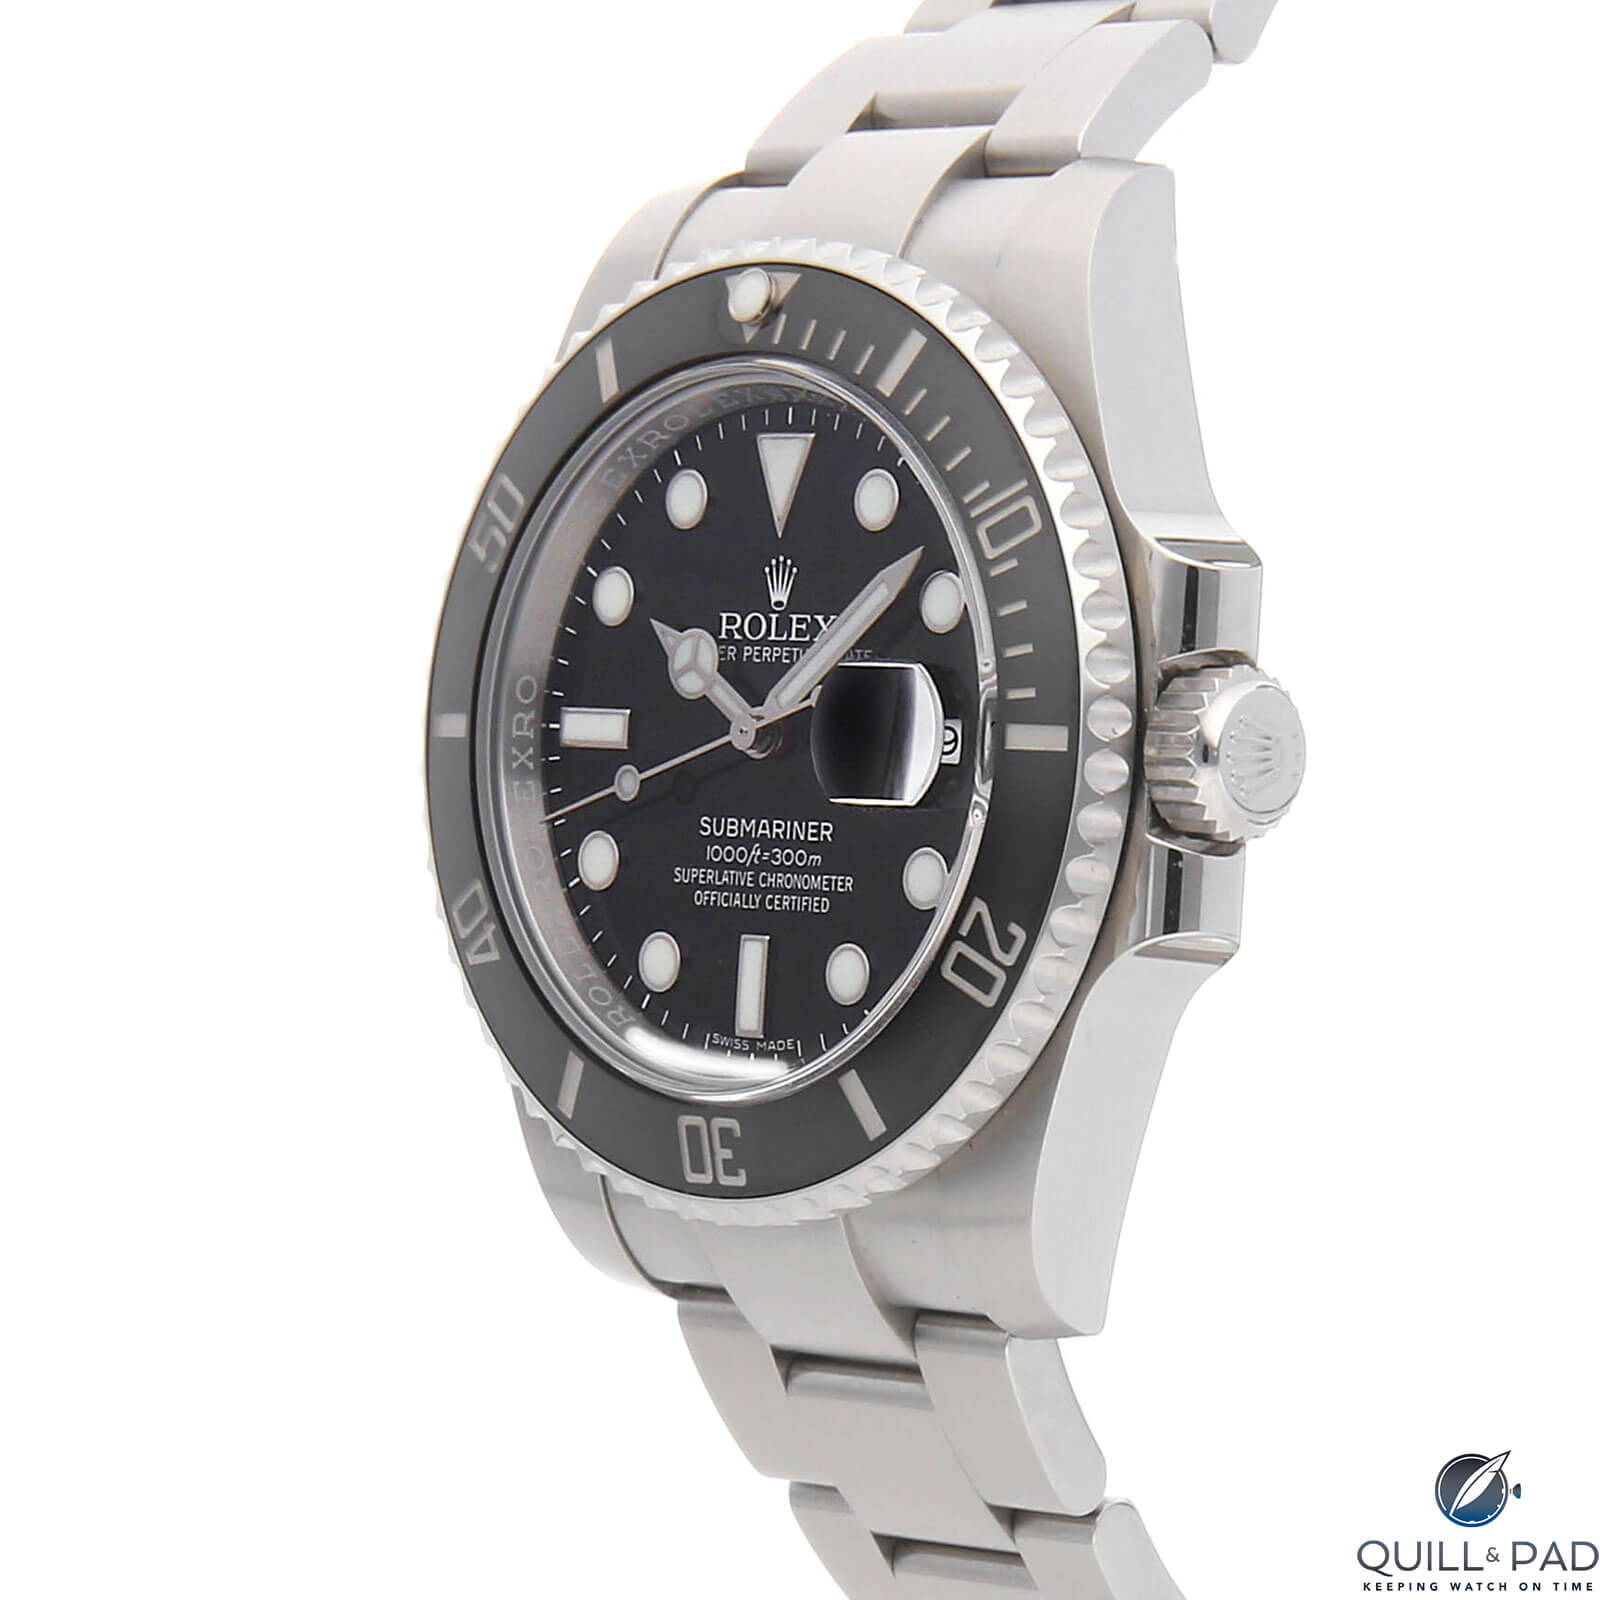 Rolex Submariner Reference 116610